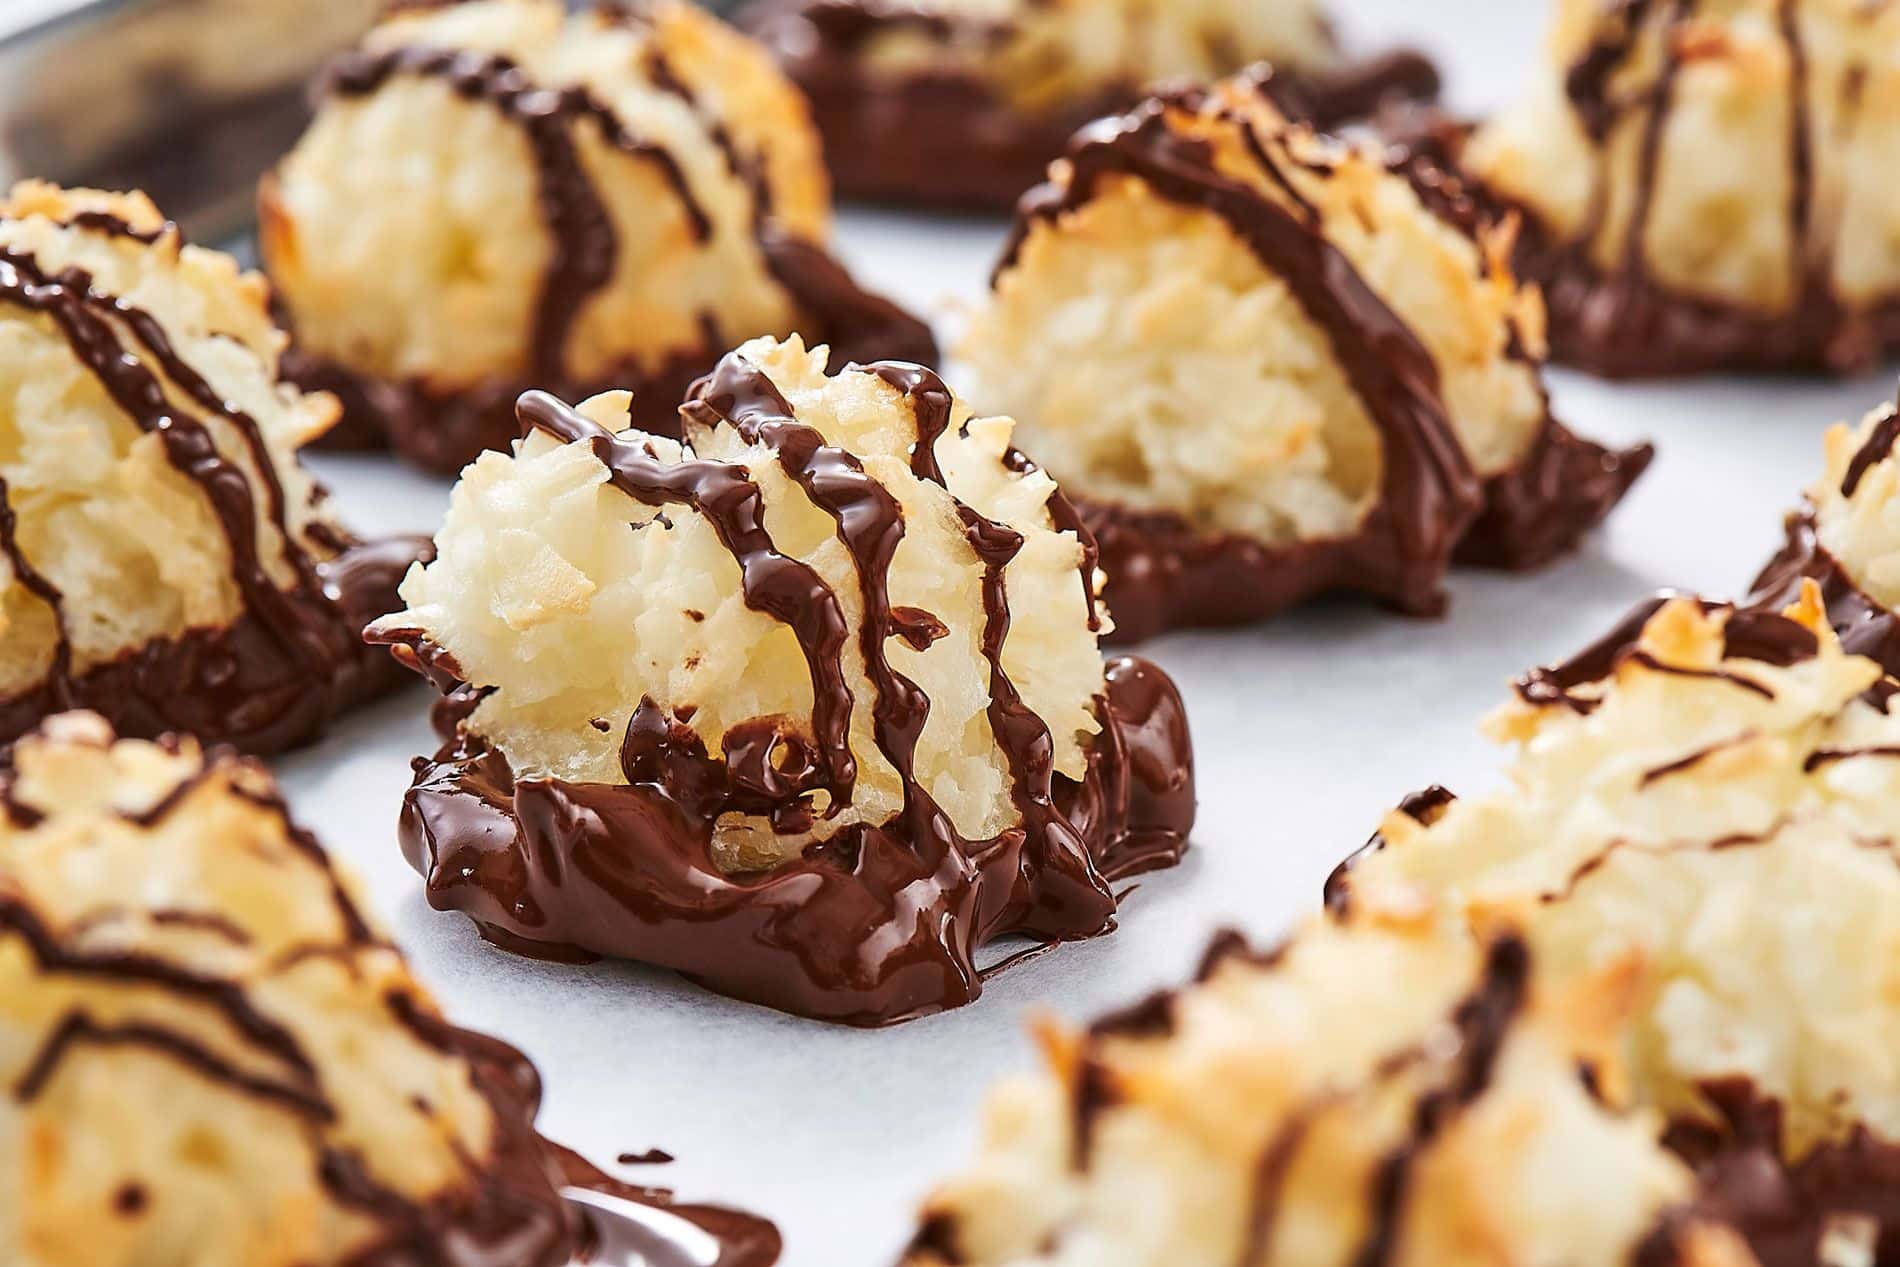 THE BEST COCONUT MACAROONS